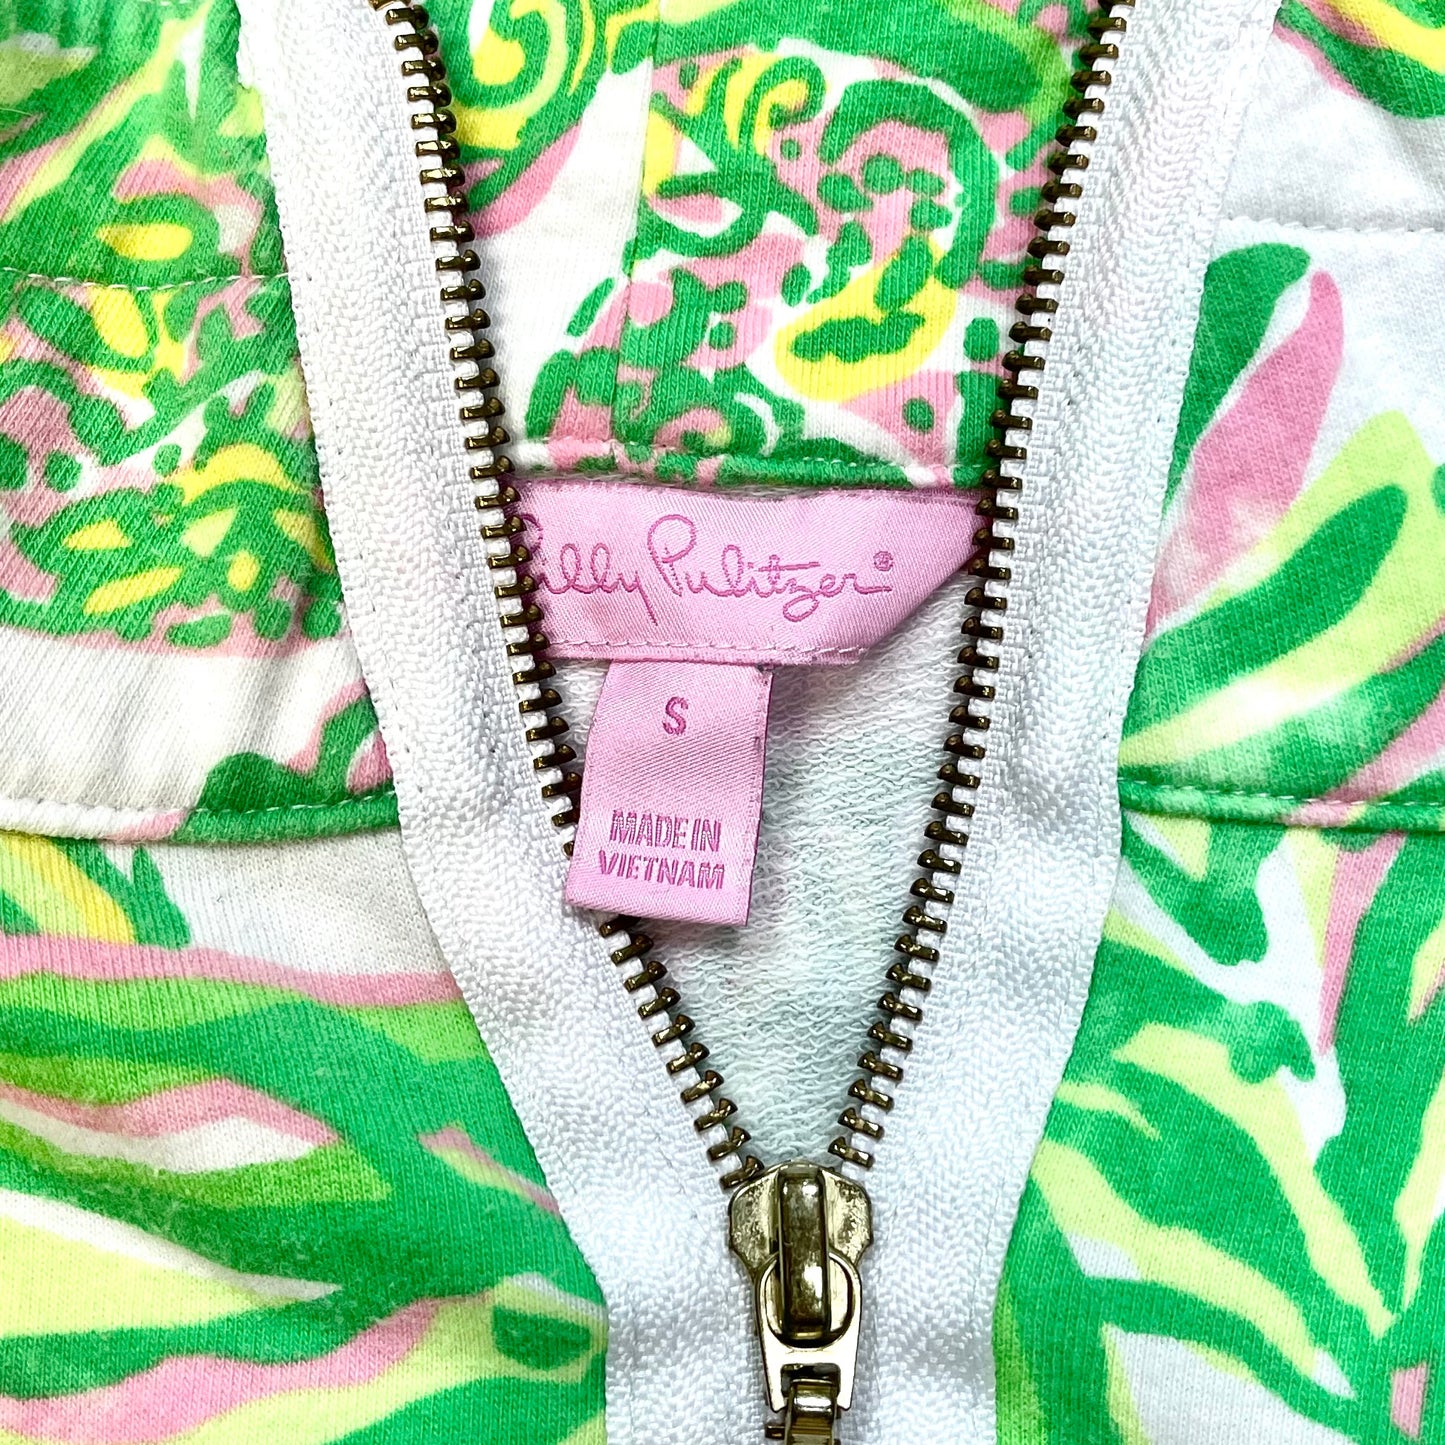 Jacket Designer By Lilly Pulitzer  Size: S